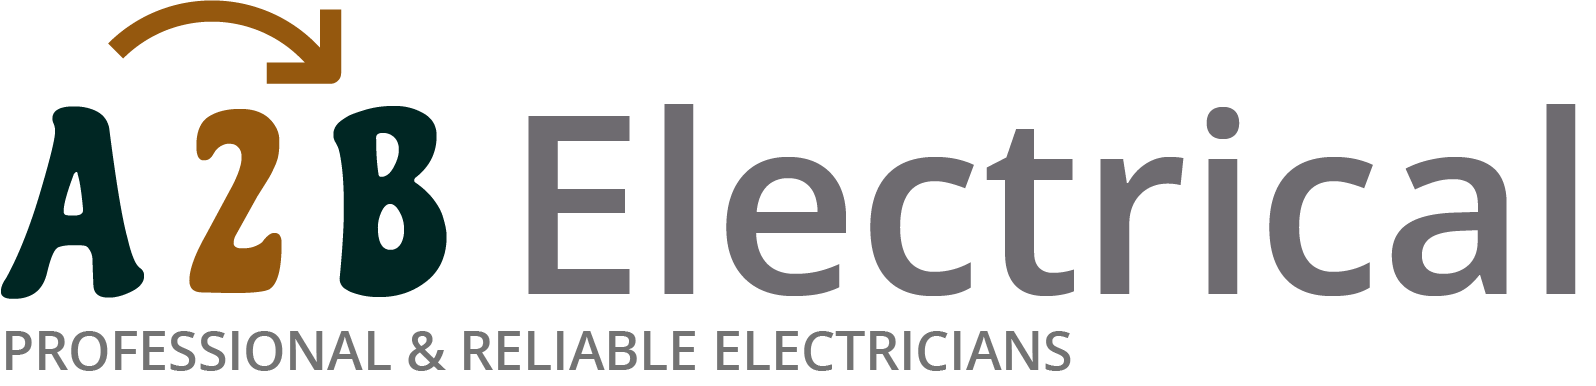 If you have electrical wiring problems in Castleford, we can provide an electrician to have a look for you. 